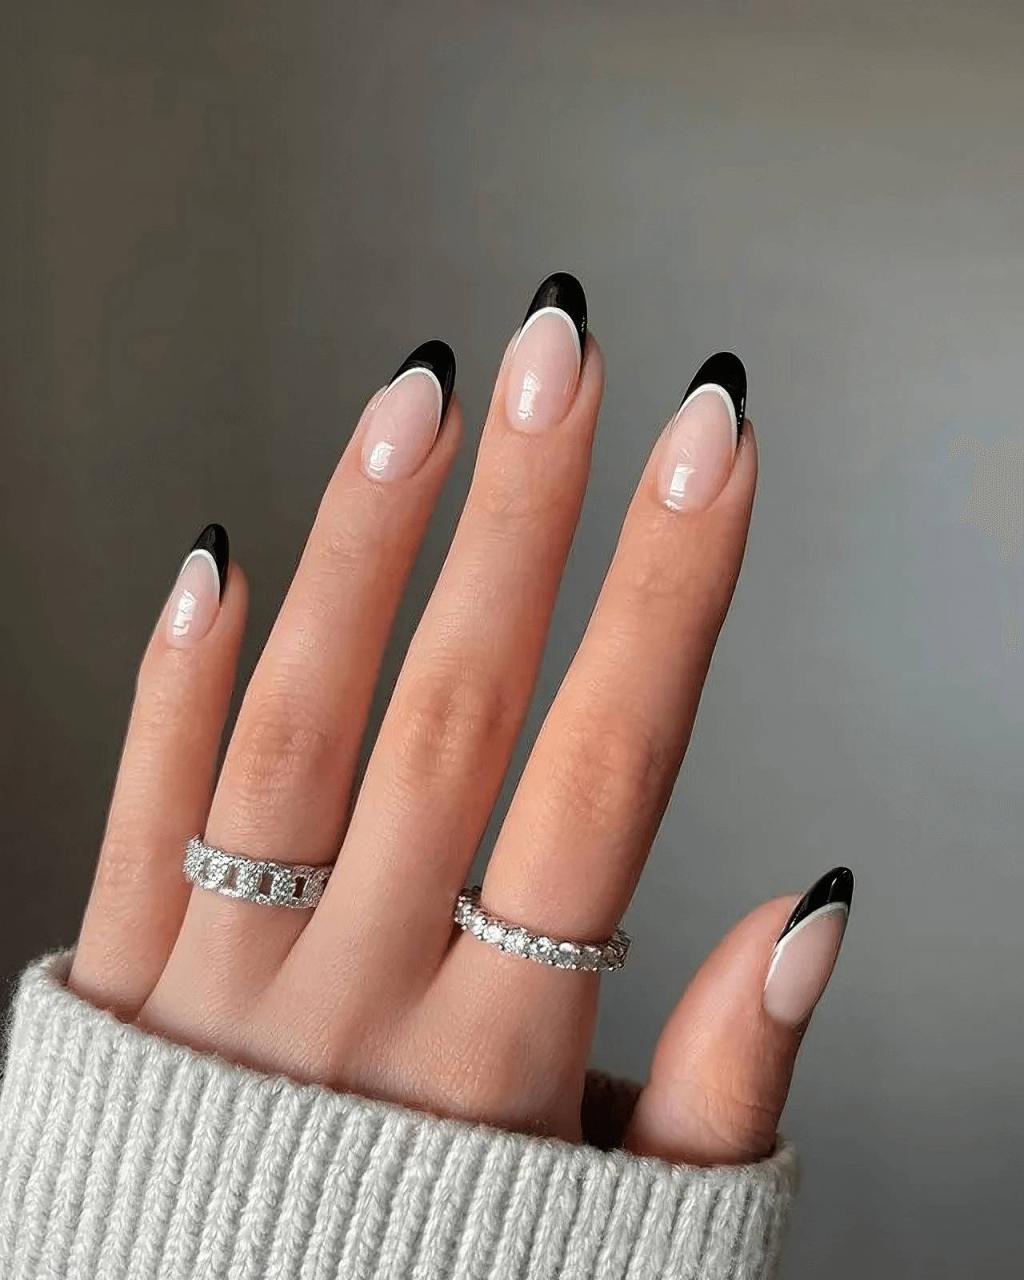 30 Classy Black Nail Designs To Glam You Up - 251